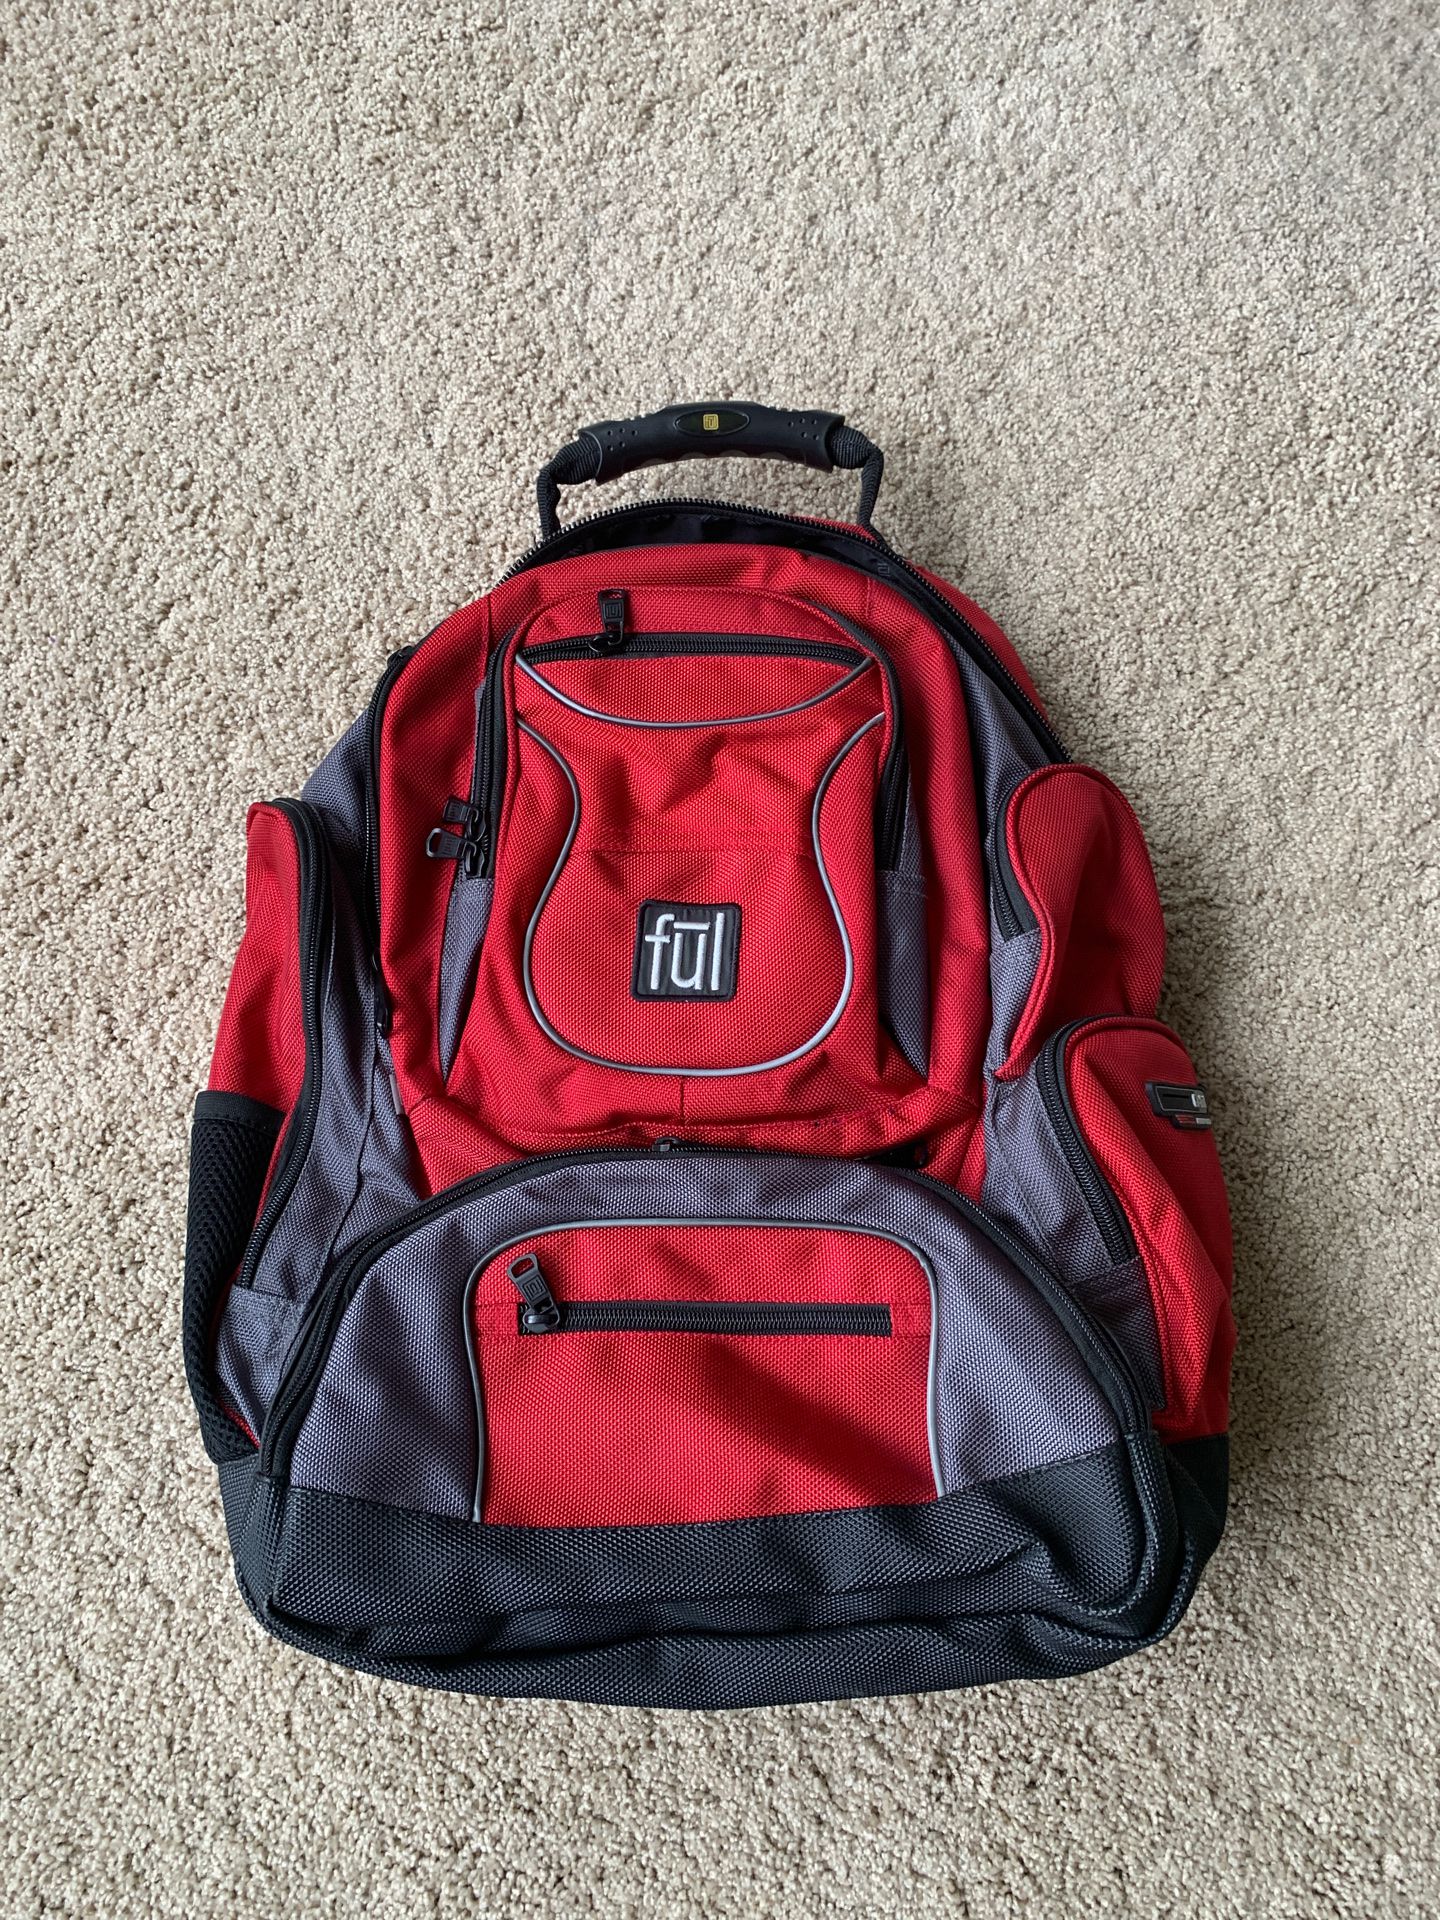 Ful laptop backpack - red